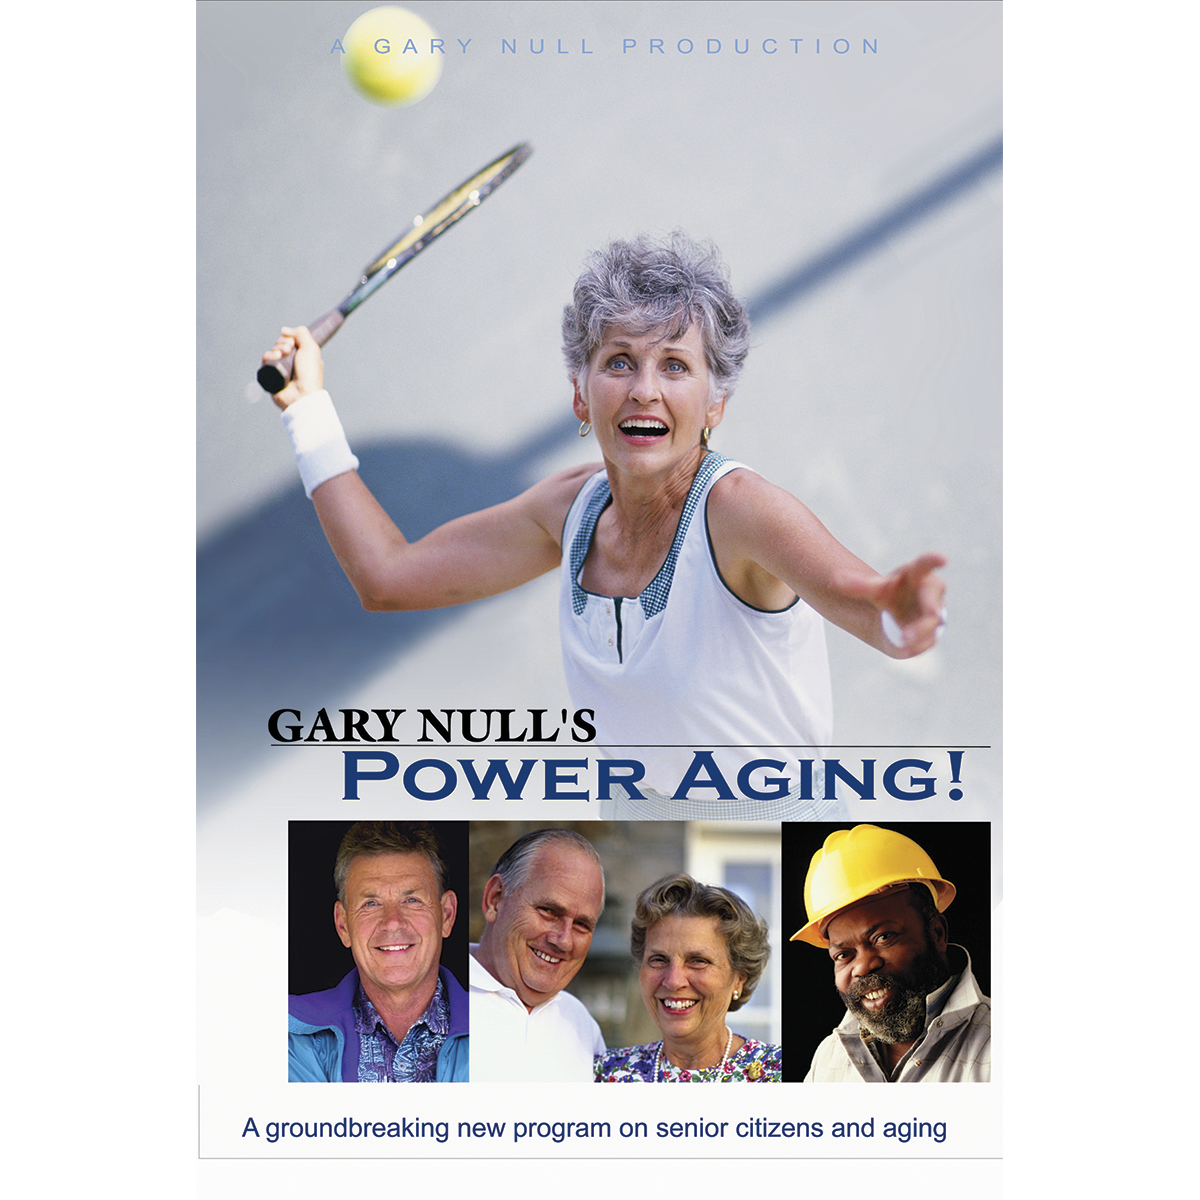 Power-Aging_040a686f-24df-45c3-9527-ff630700ba55.png